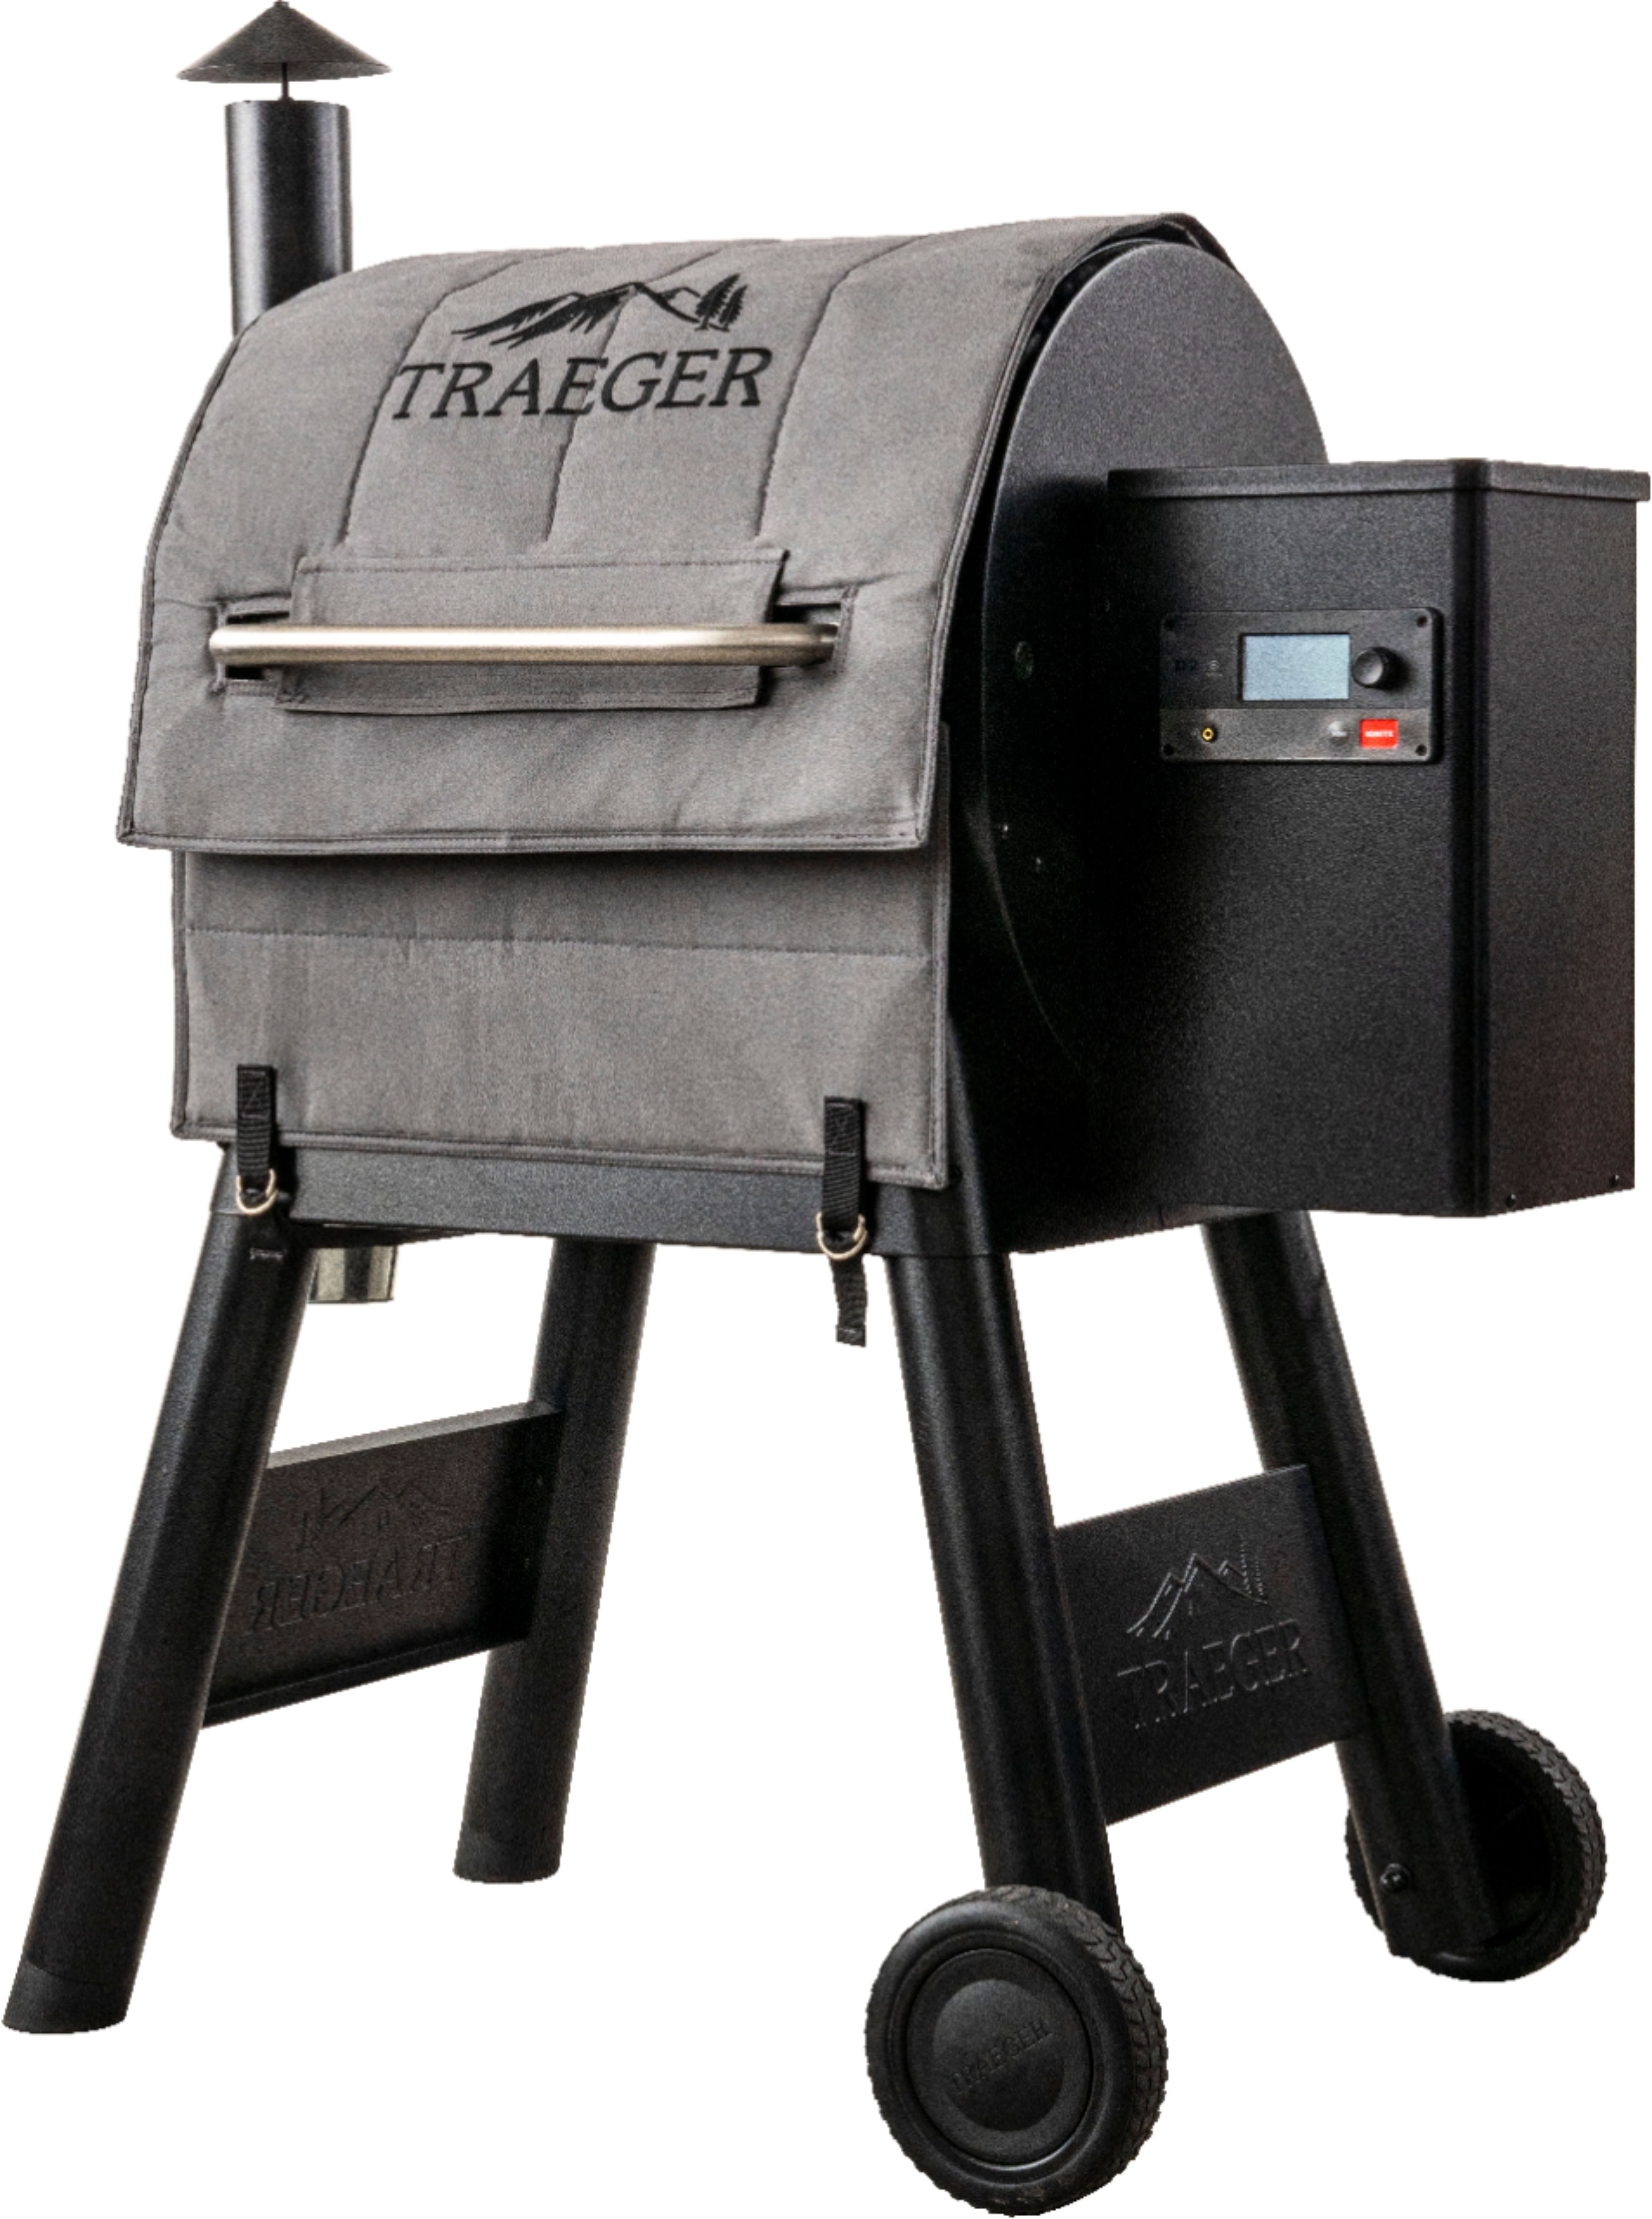 Angle View: Traeger Grills - Pro 22/Pro 575 Grill Insulation Blanket - Gray